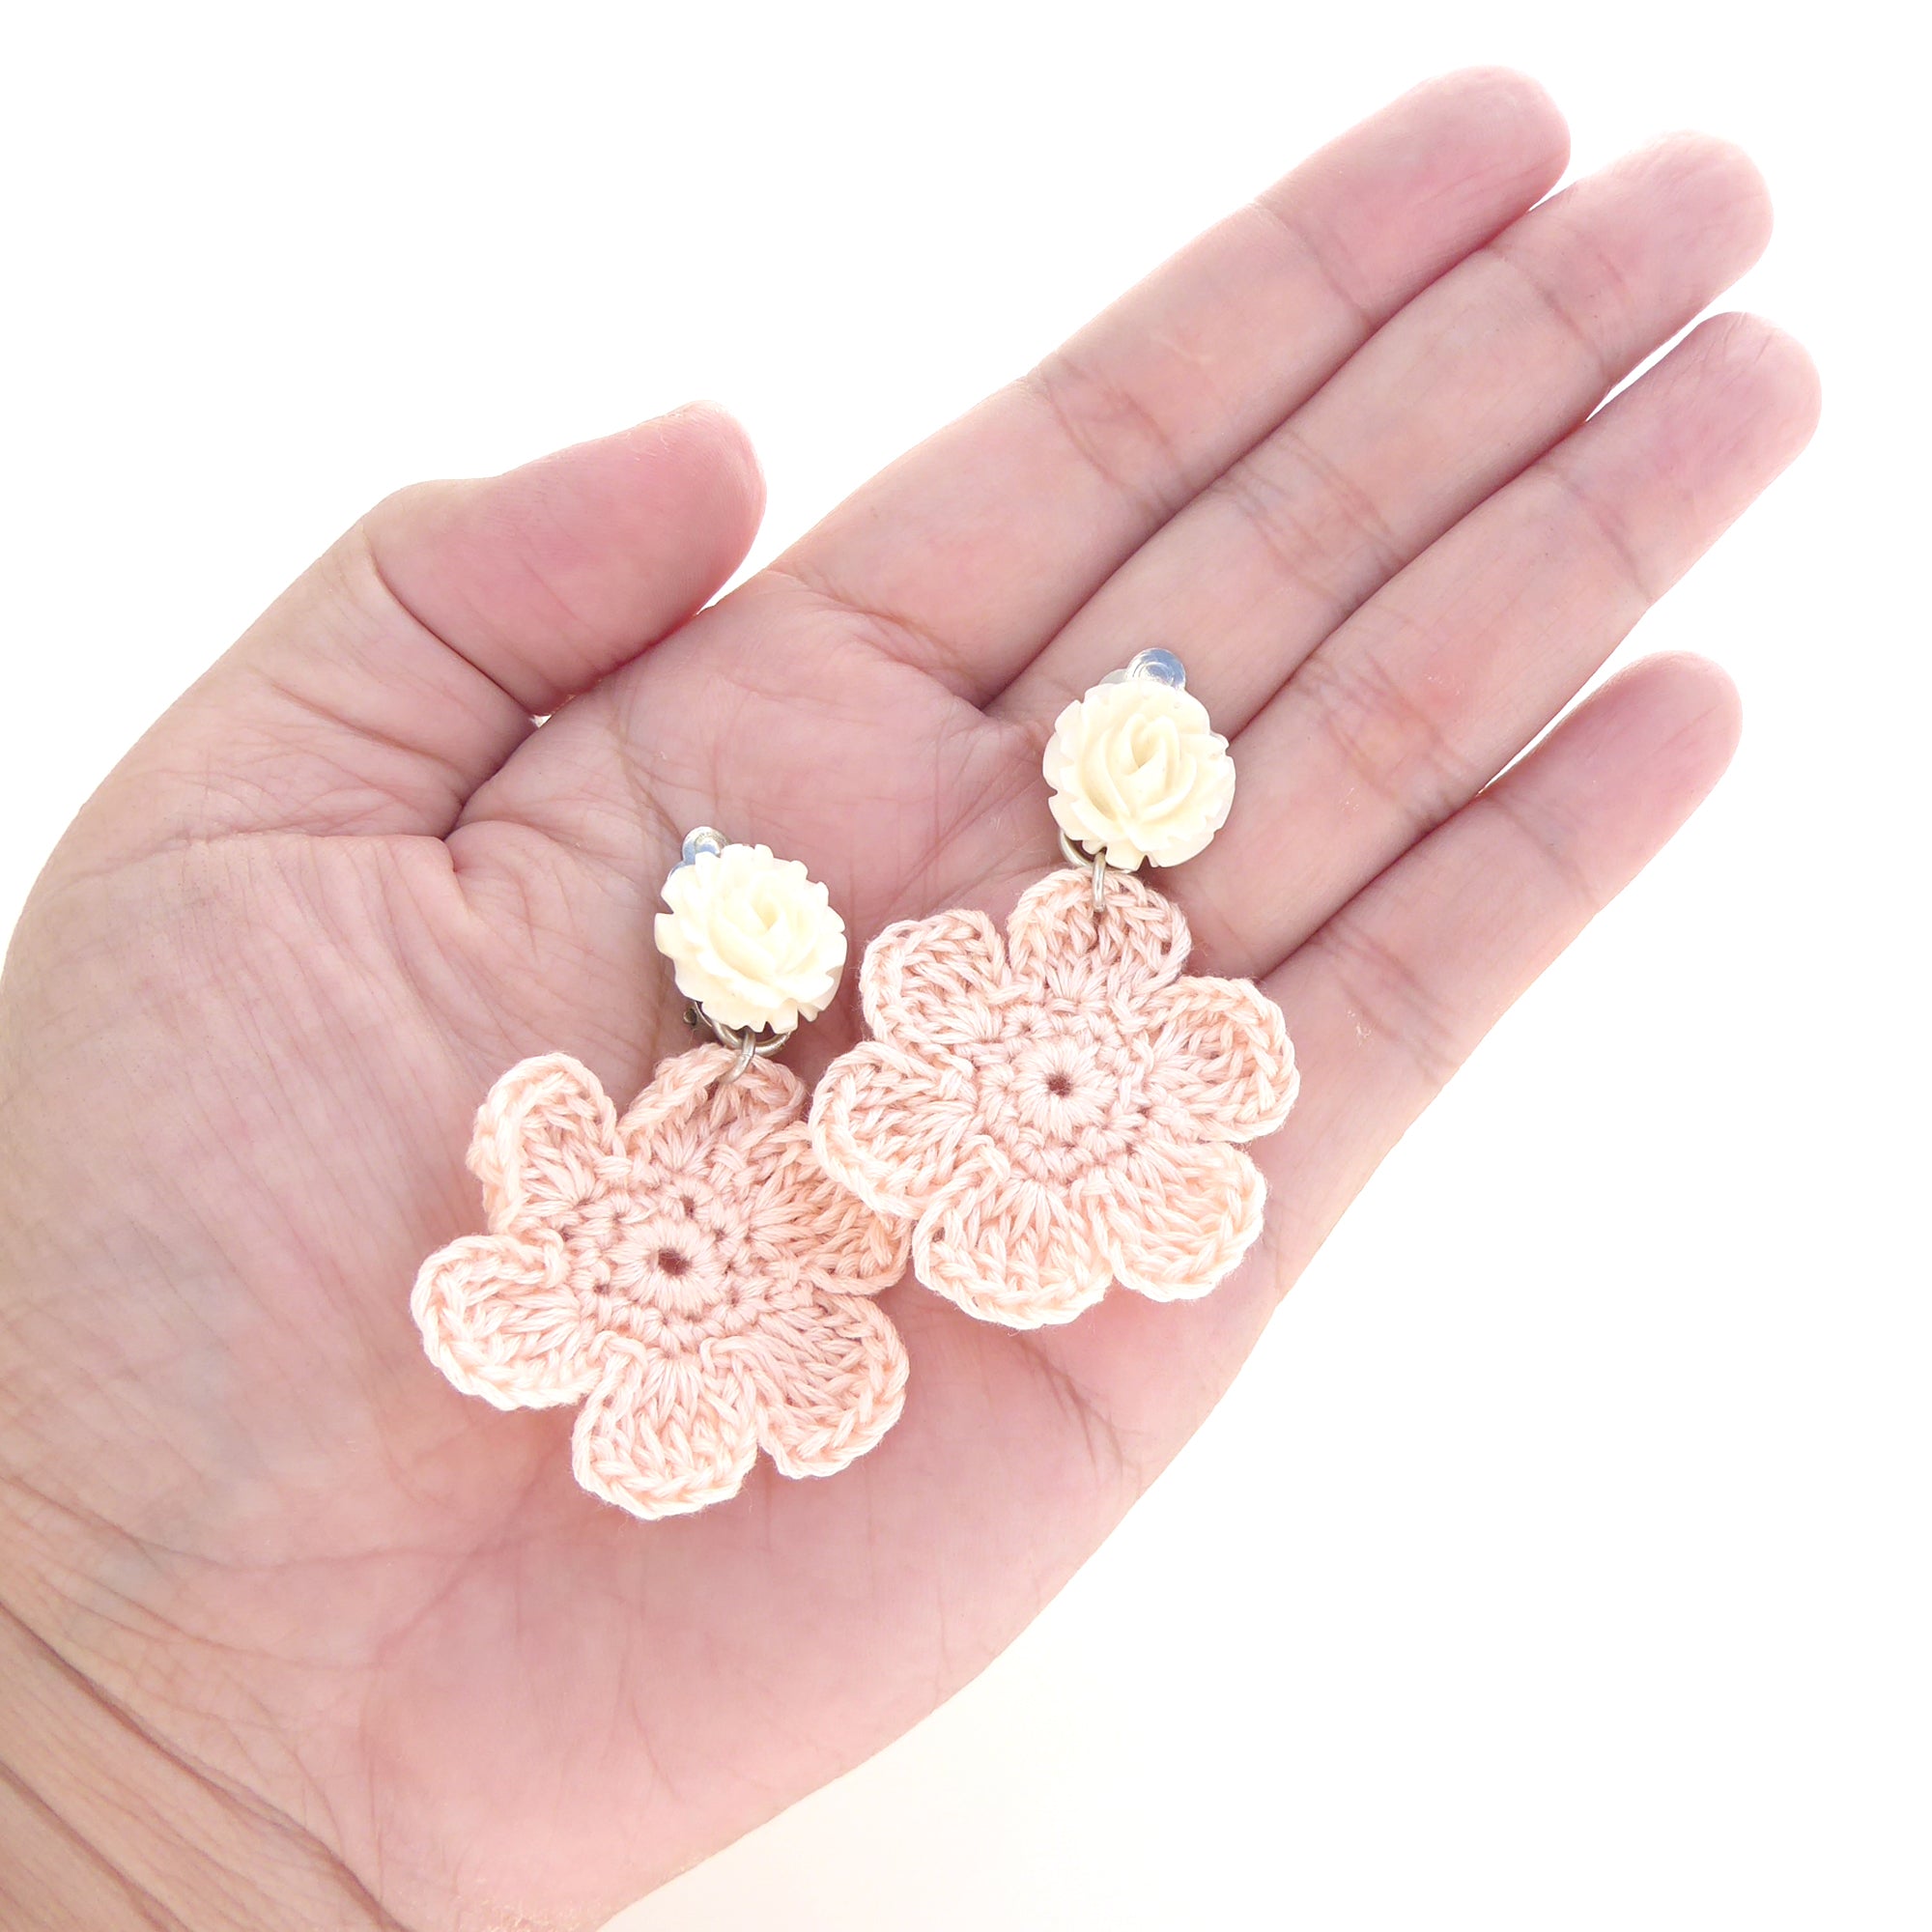 1950s celluloid rose and pale pink crochet flower earrings by Jenny Dayco 7